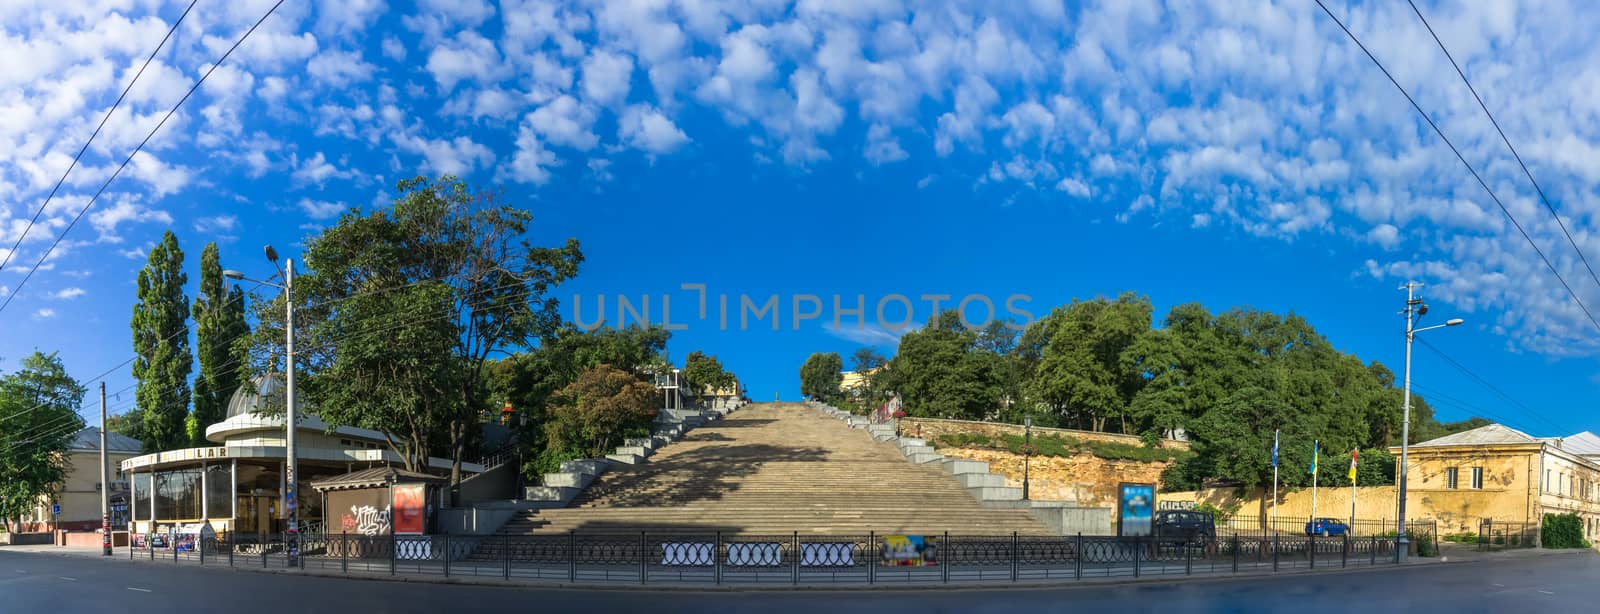 The Potemkin Stairs, or Potemkin Steps the entrance into the city, the best known symbol of Odessa, Ukraine